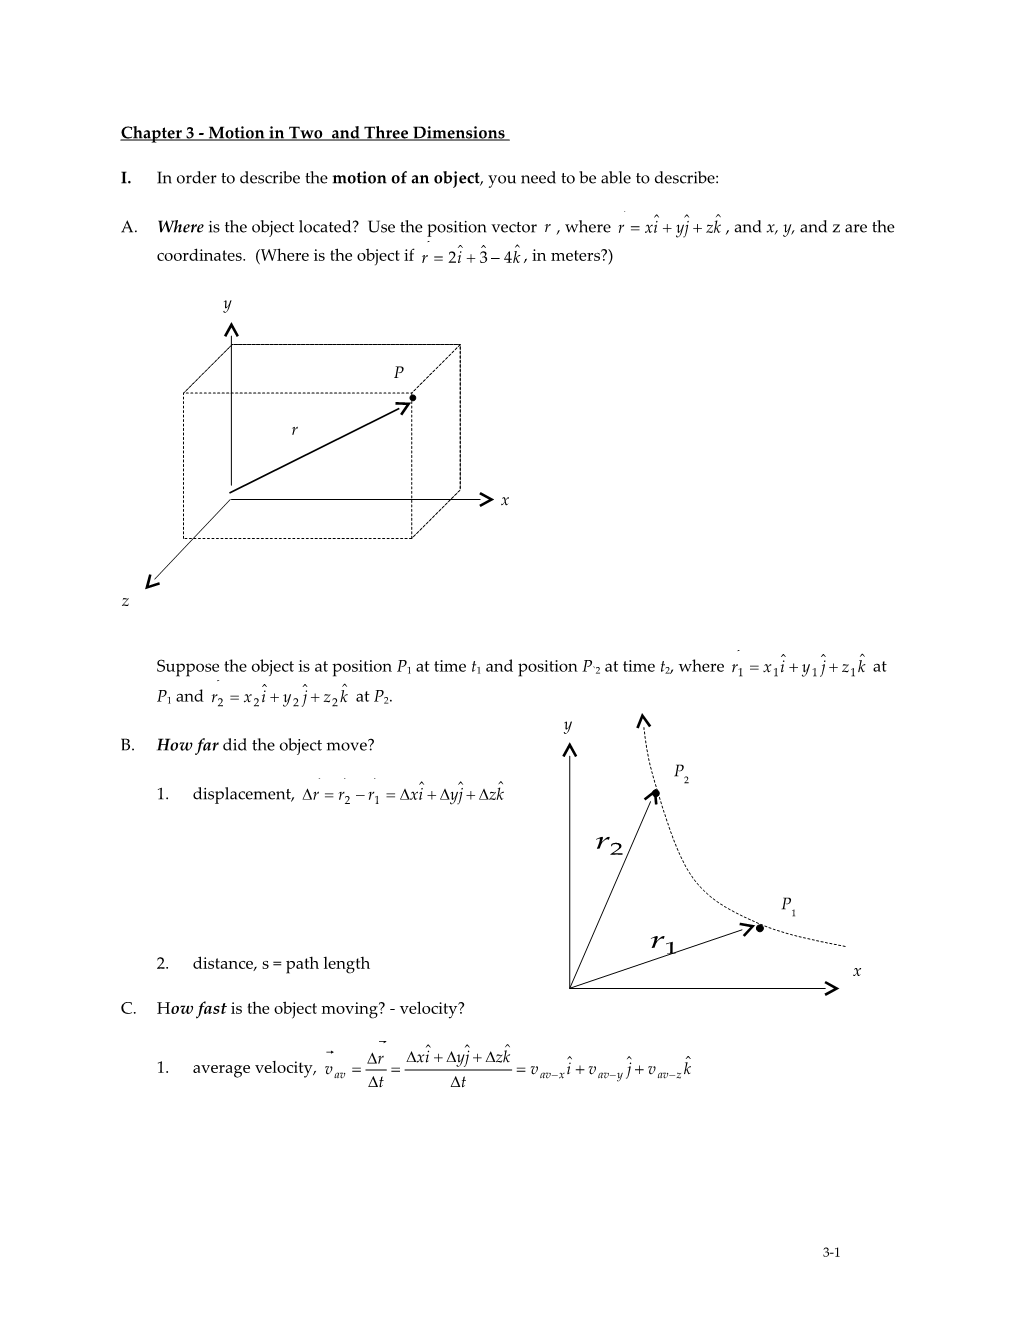 Chapter 4 - Motion in Two Dimensions - Two Dimensional Kinematics